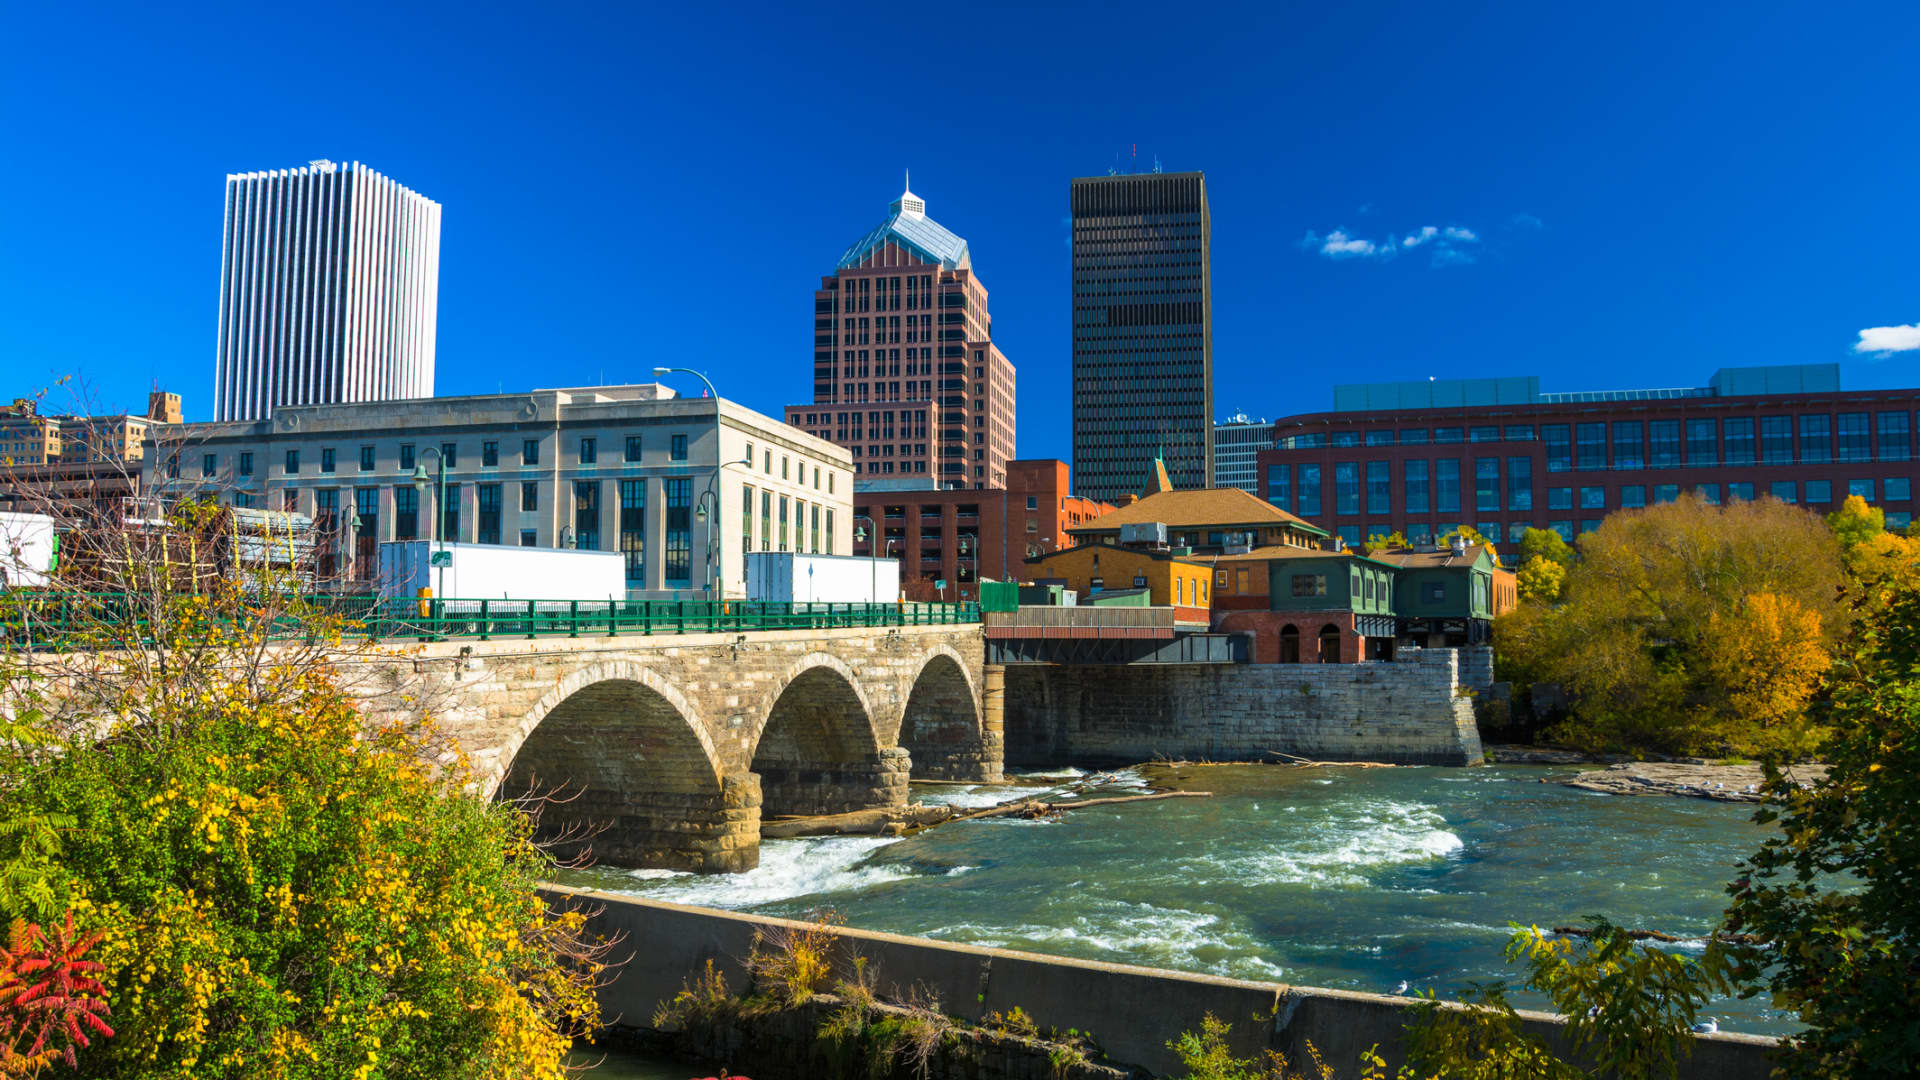 Rochester, New York ranked as the third city where homes are selling over the original asking price.